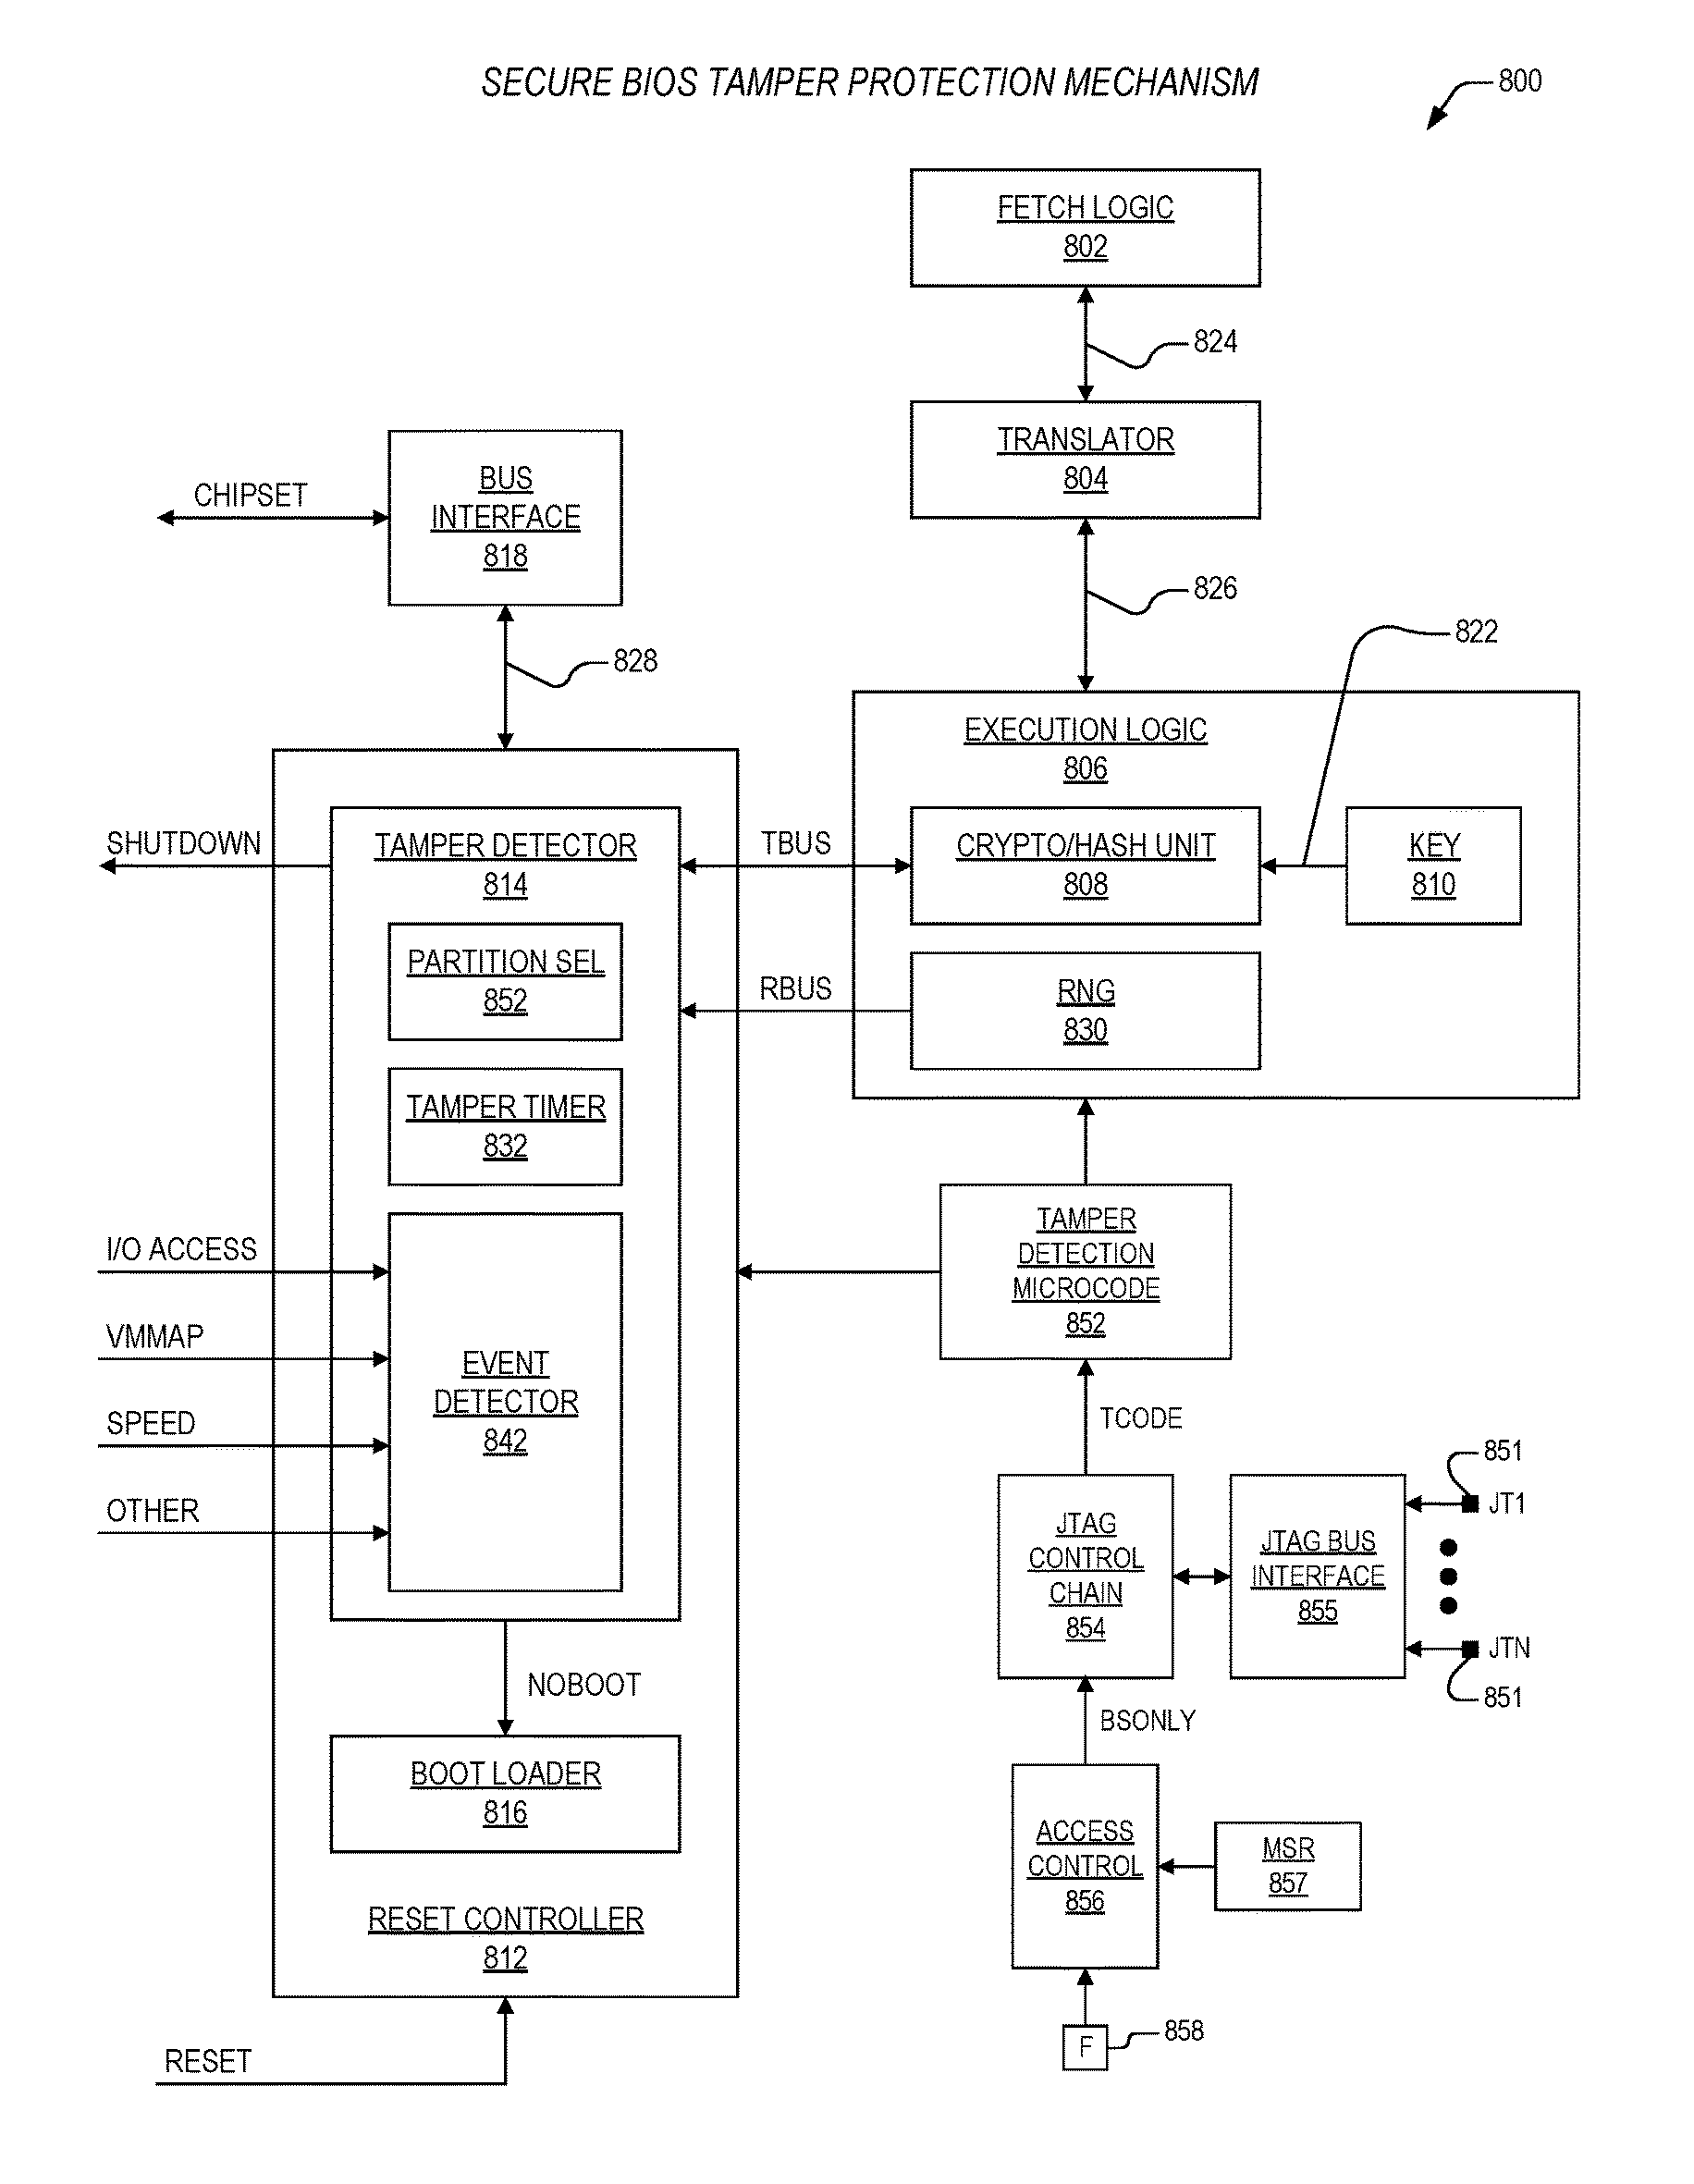 Fuse-enabled secure BIOS mechanism with override feature